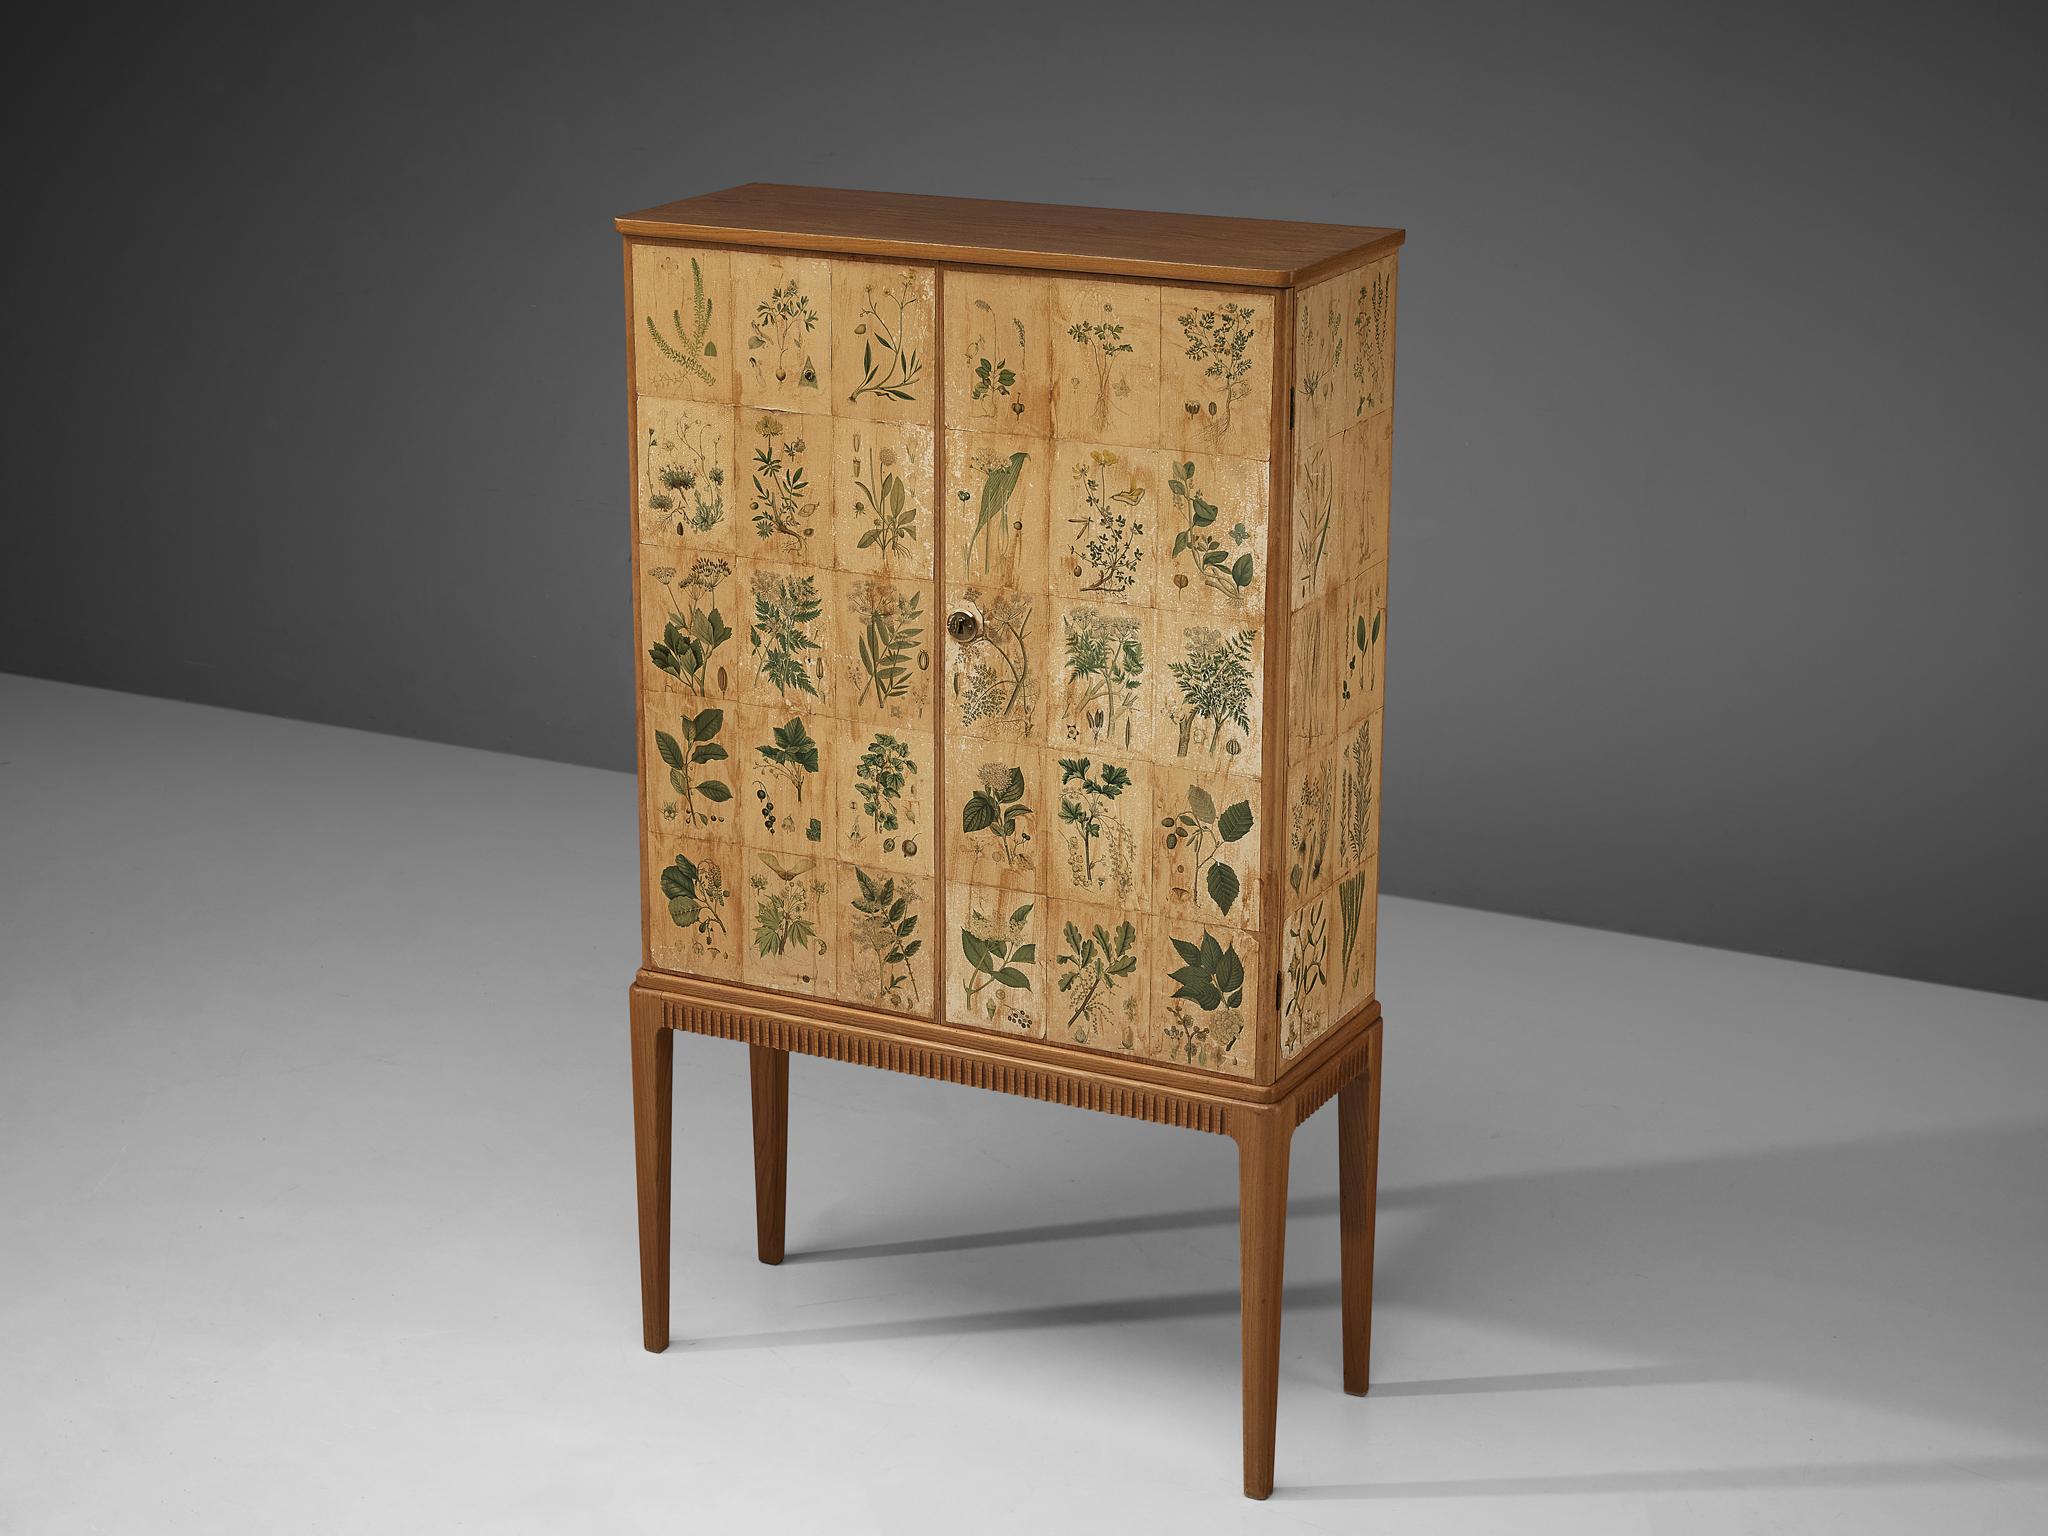 Scandinavian Josef Frank Inspired ‘Flora’ Cabinet in Ash and Paper with Plant Motifs